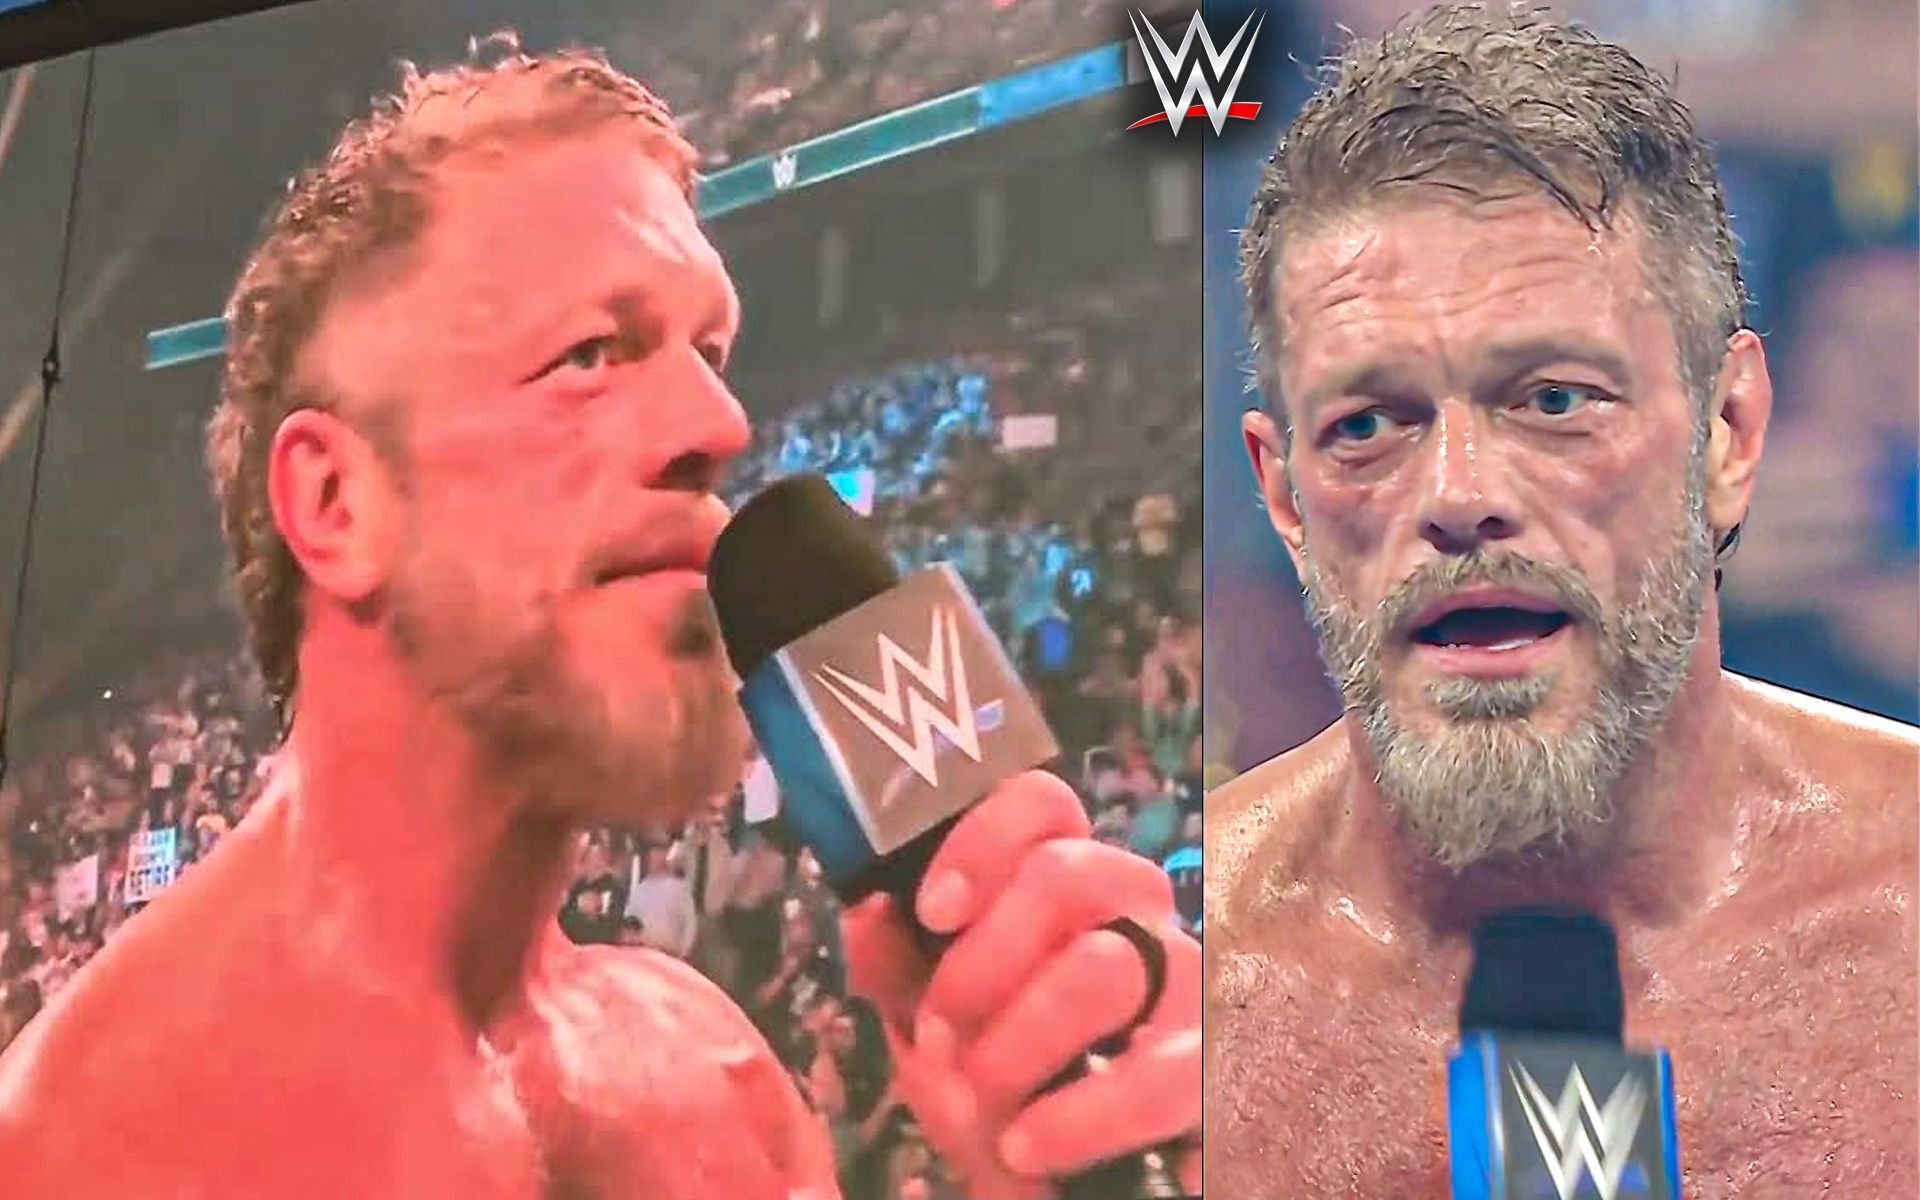 Edge defeated Sheamus in possibly his last match in WWE